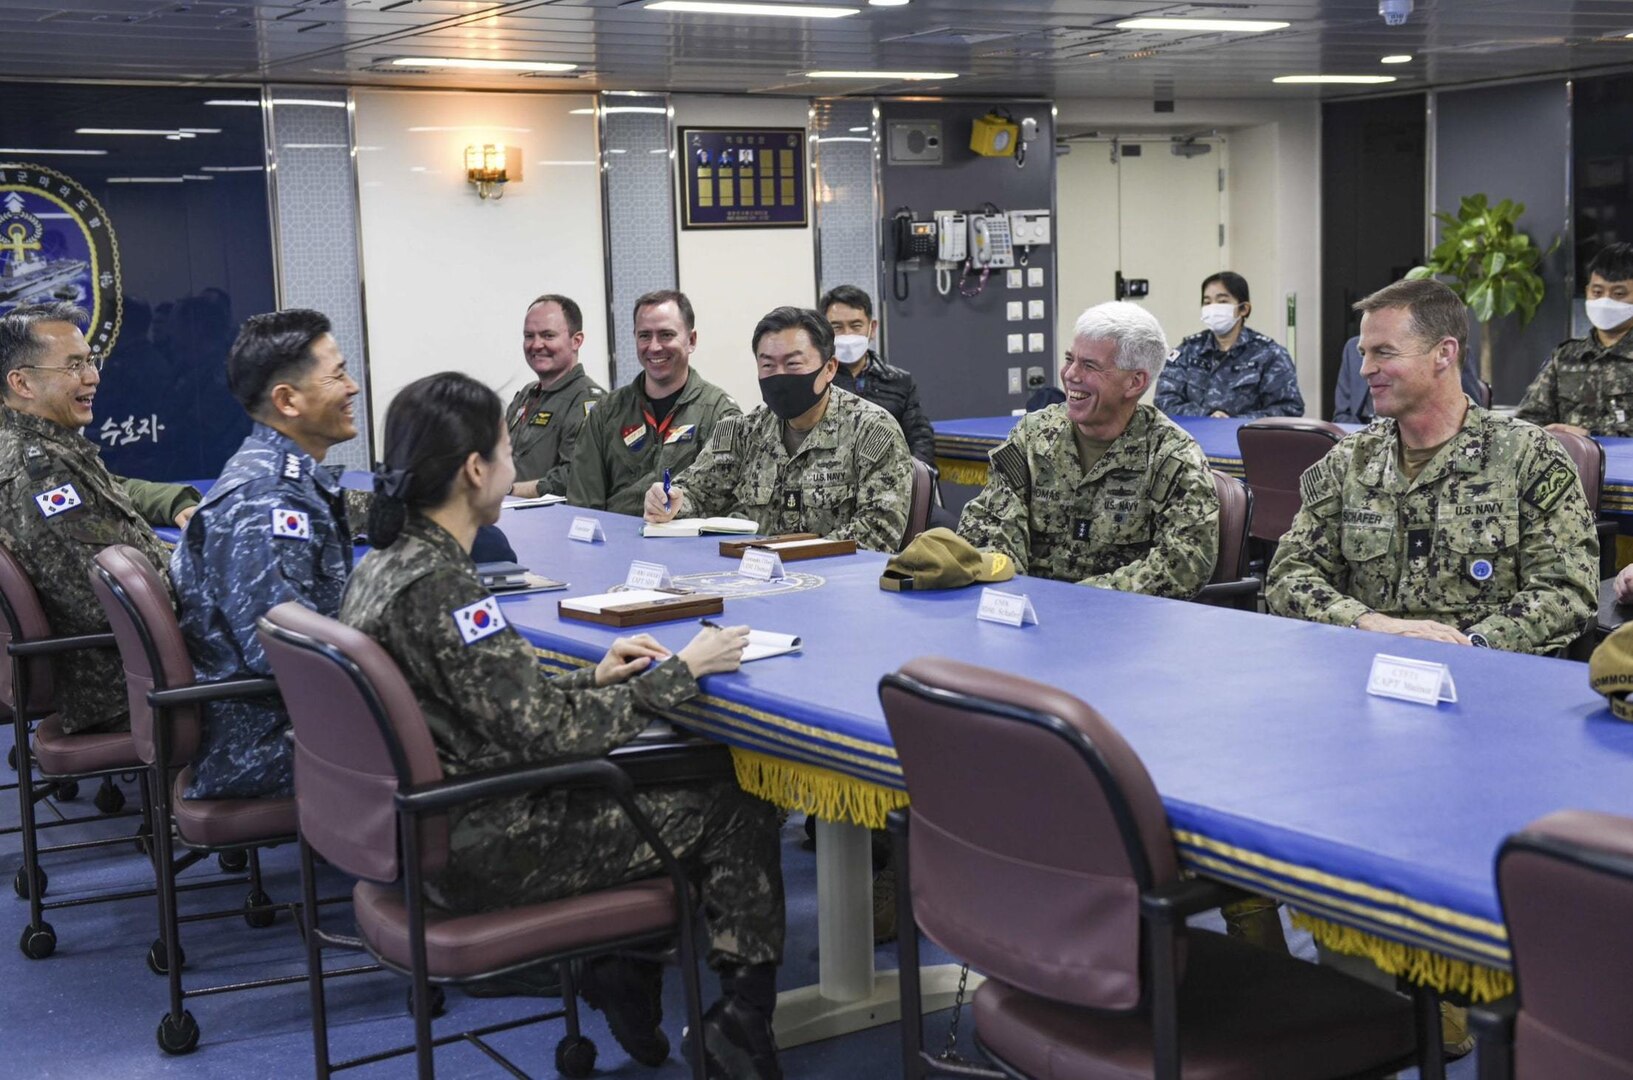 230202-N-ZU710-0108 BUSAN, Republic of Korea (Feb. 2, 2023) Vice Adm. Karl Thomas, commander, U.S. 7th Fleet, holds a conference with senior Korean and U.S. Navy leadership aboard the Republic of Korea (ROK) Navy Dokdo-class amphibious assault ship ROKS Marado (LPH-6112) in Busan, ROK. Vice Adm. Thomas is in the Republic of Korea to attend the 7th annual Anti-submarine Warfare Cooperation Committee meeting. (U.S. Navy photo by Mass Communication Specialist 2nd Class Michael Chen)